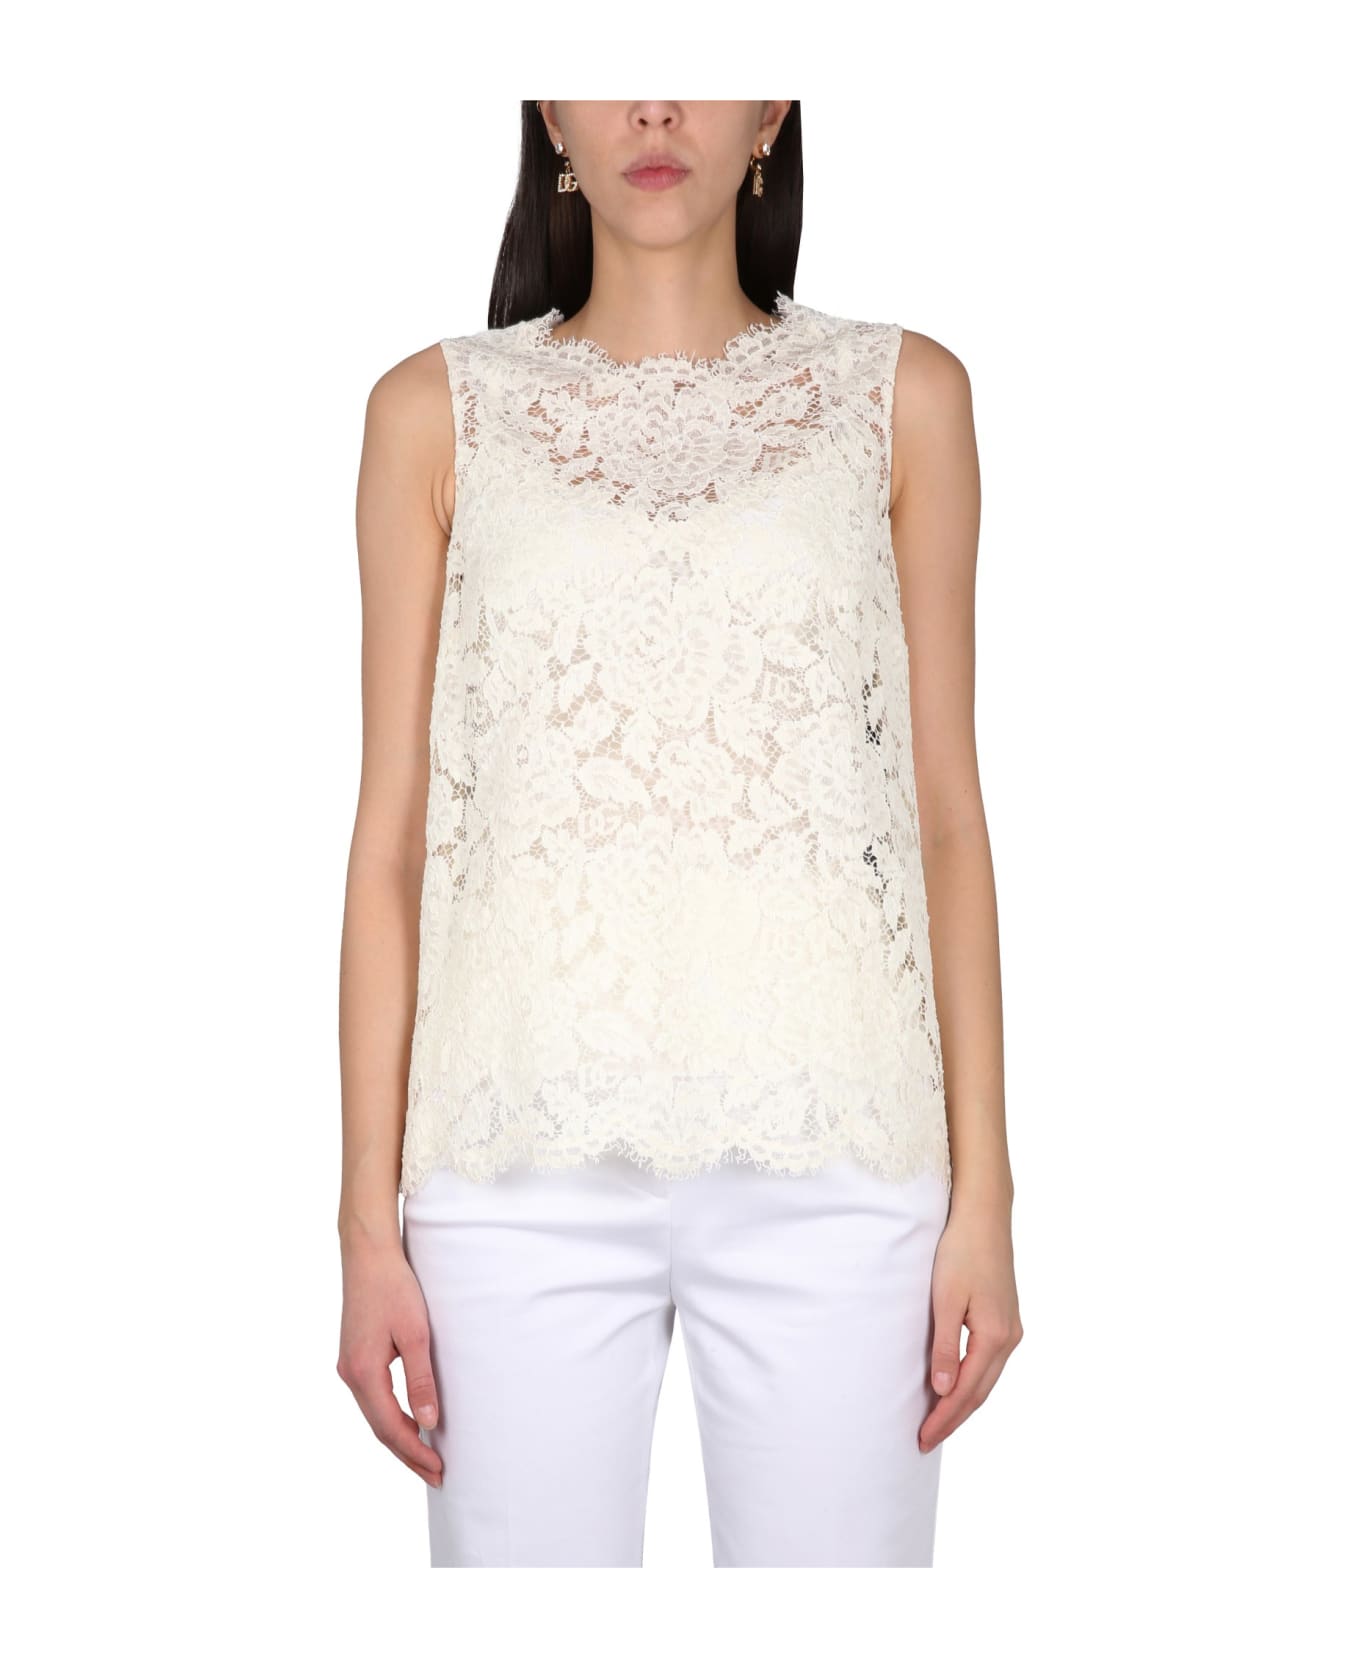 Dolce & Gabbana Logoed Stretch Lace Top タンクトップ